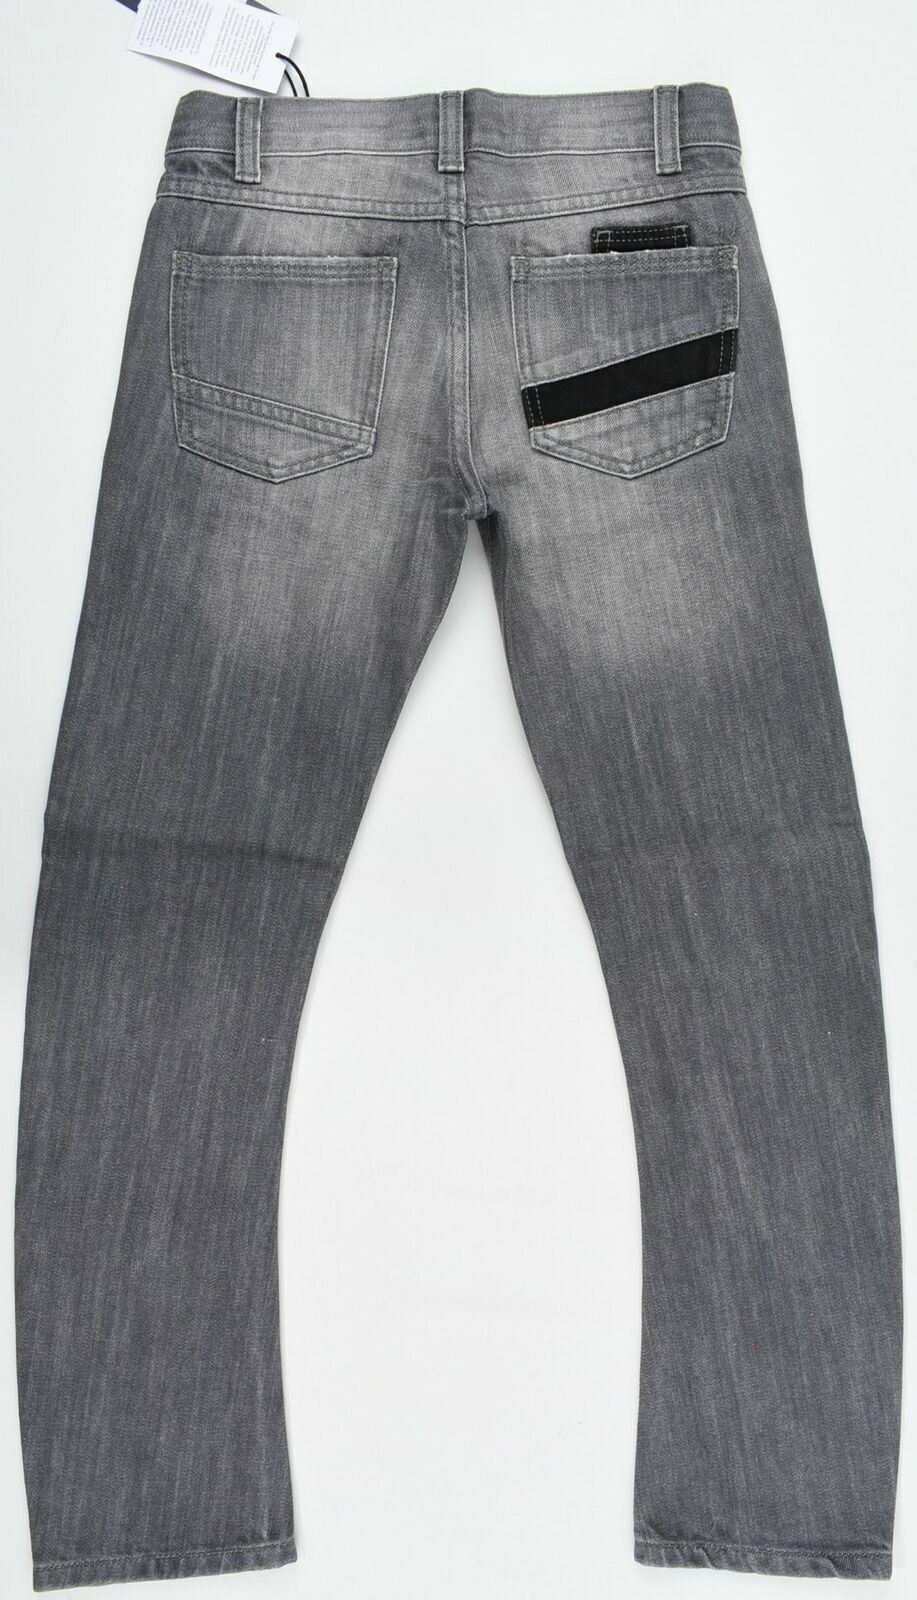 GUESS Girl's Curved Leg Distressed look Grey Denim Jeans- Age 8 Years